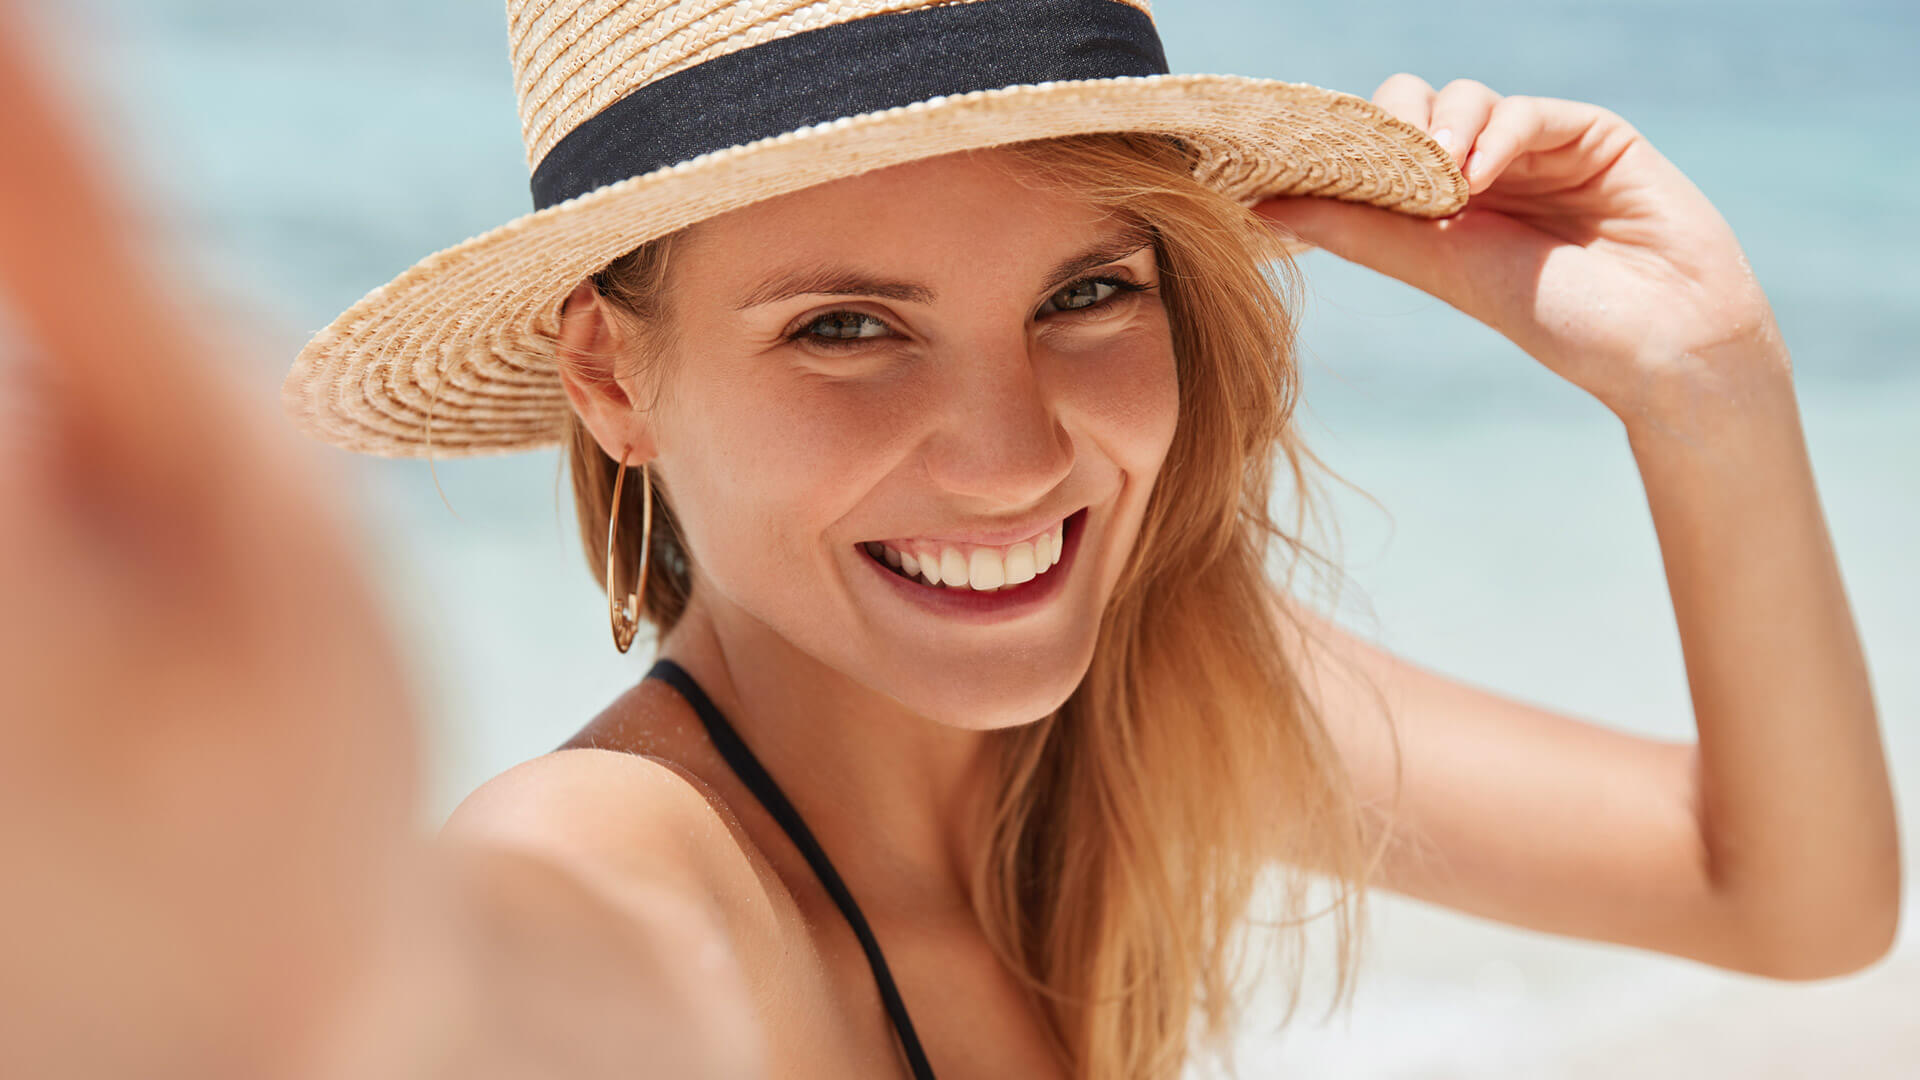 woman smiling at beach wearing hat